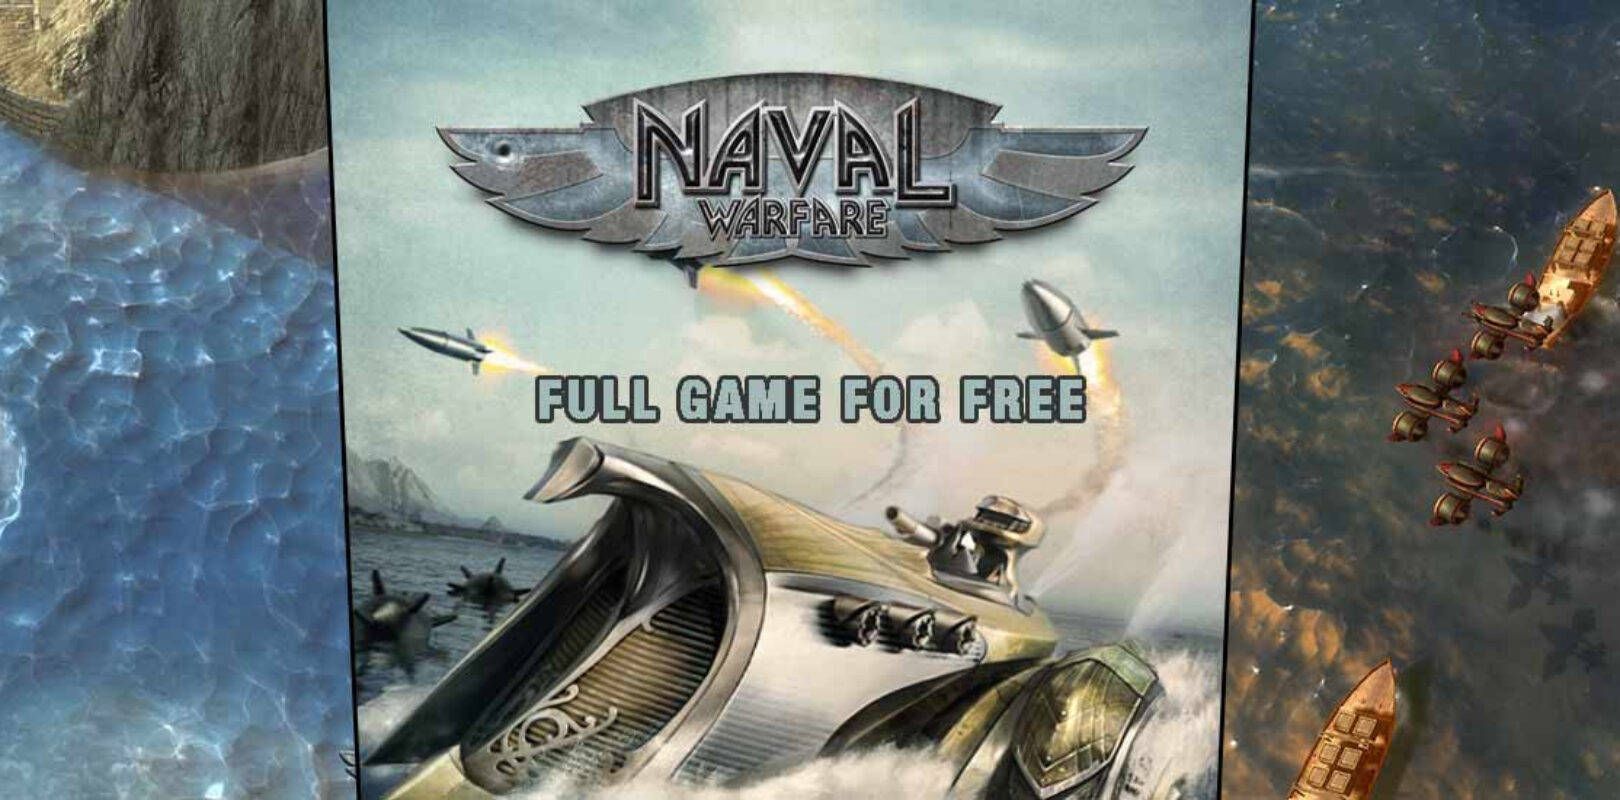 Free Naval Warfare Ended Pivotal Gamers - best naval warfare games on roblox